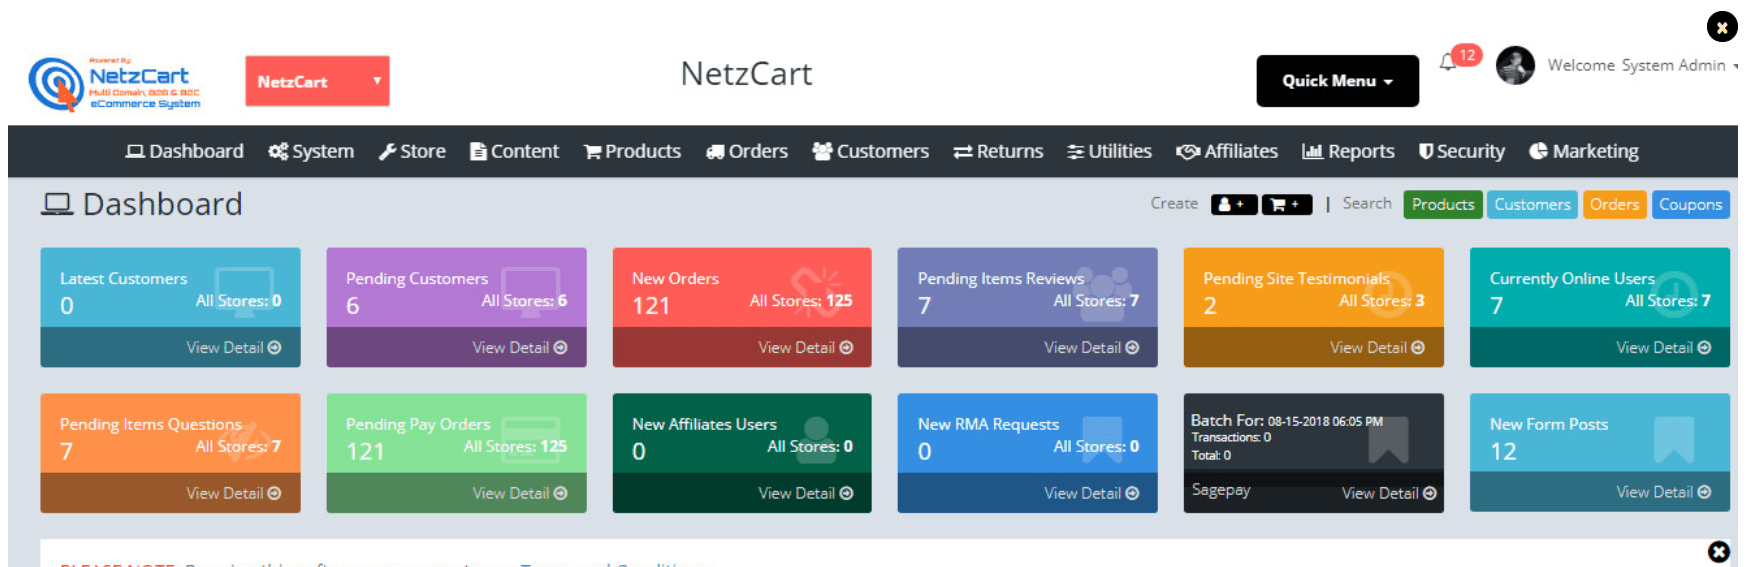 NetzCart Review With Discount Coupon Codes- Dashboard